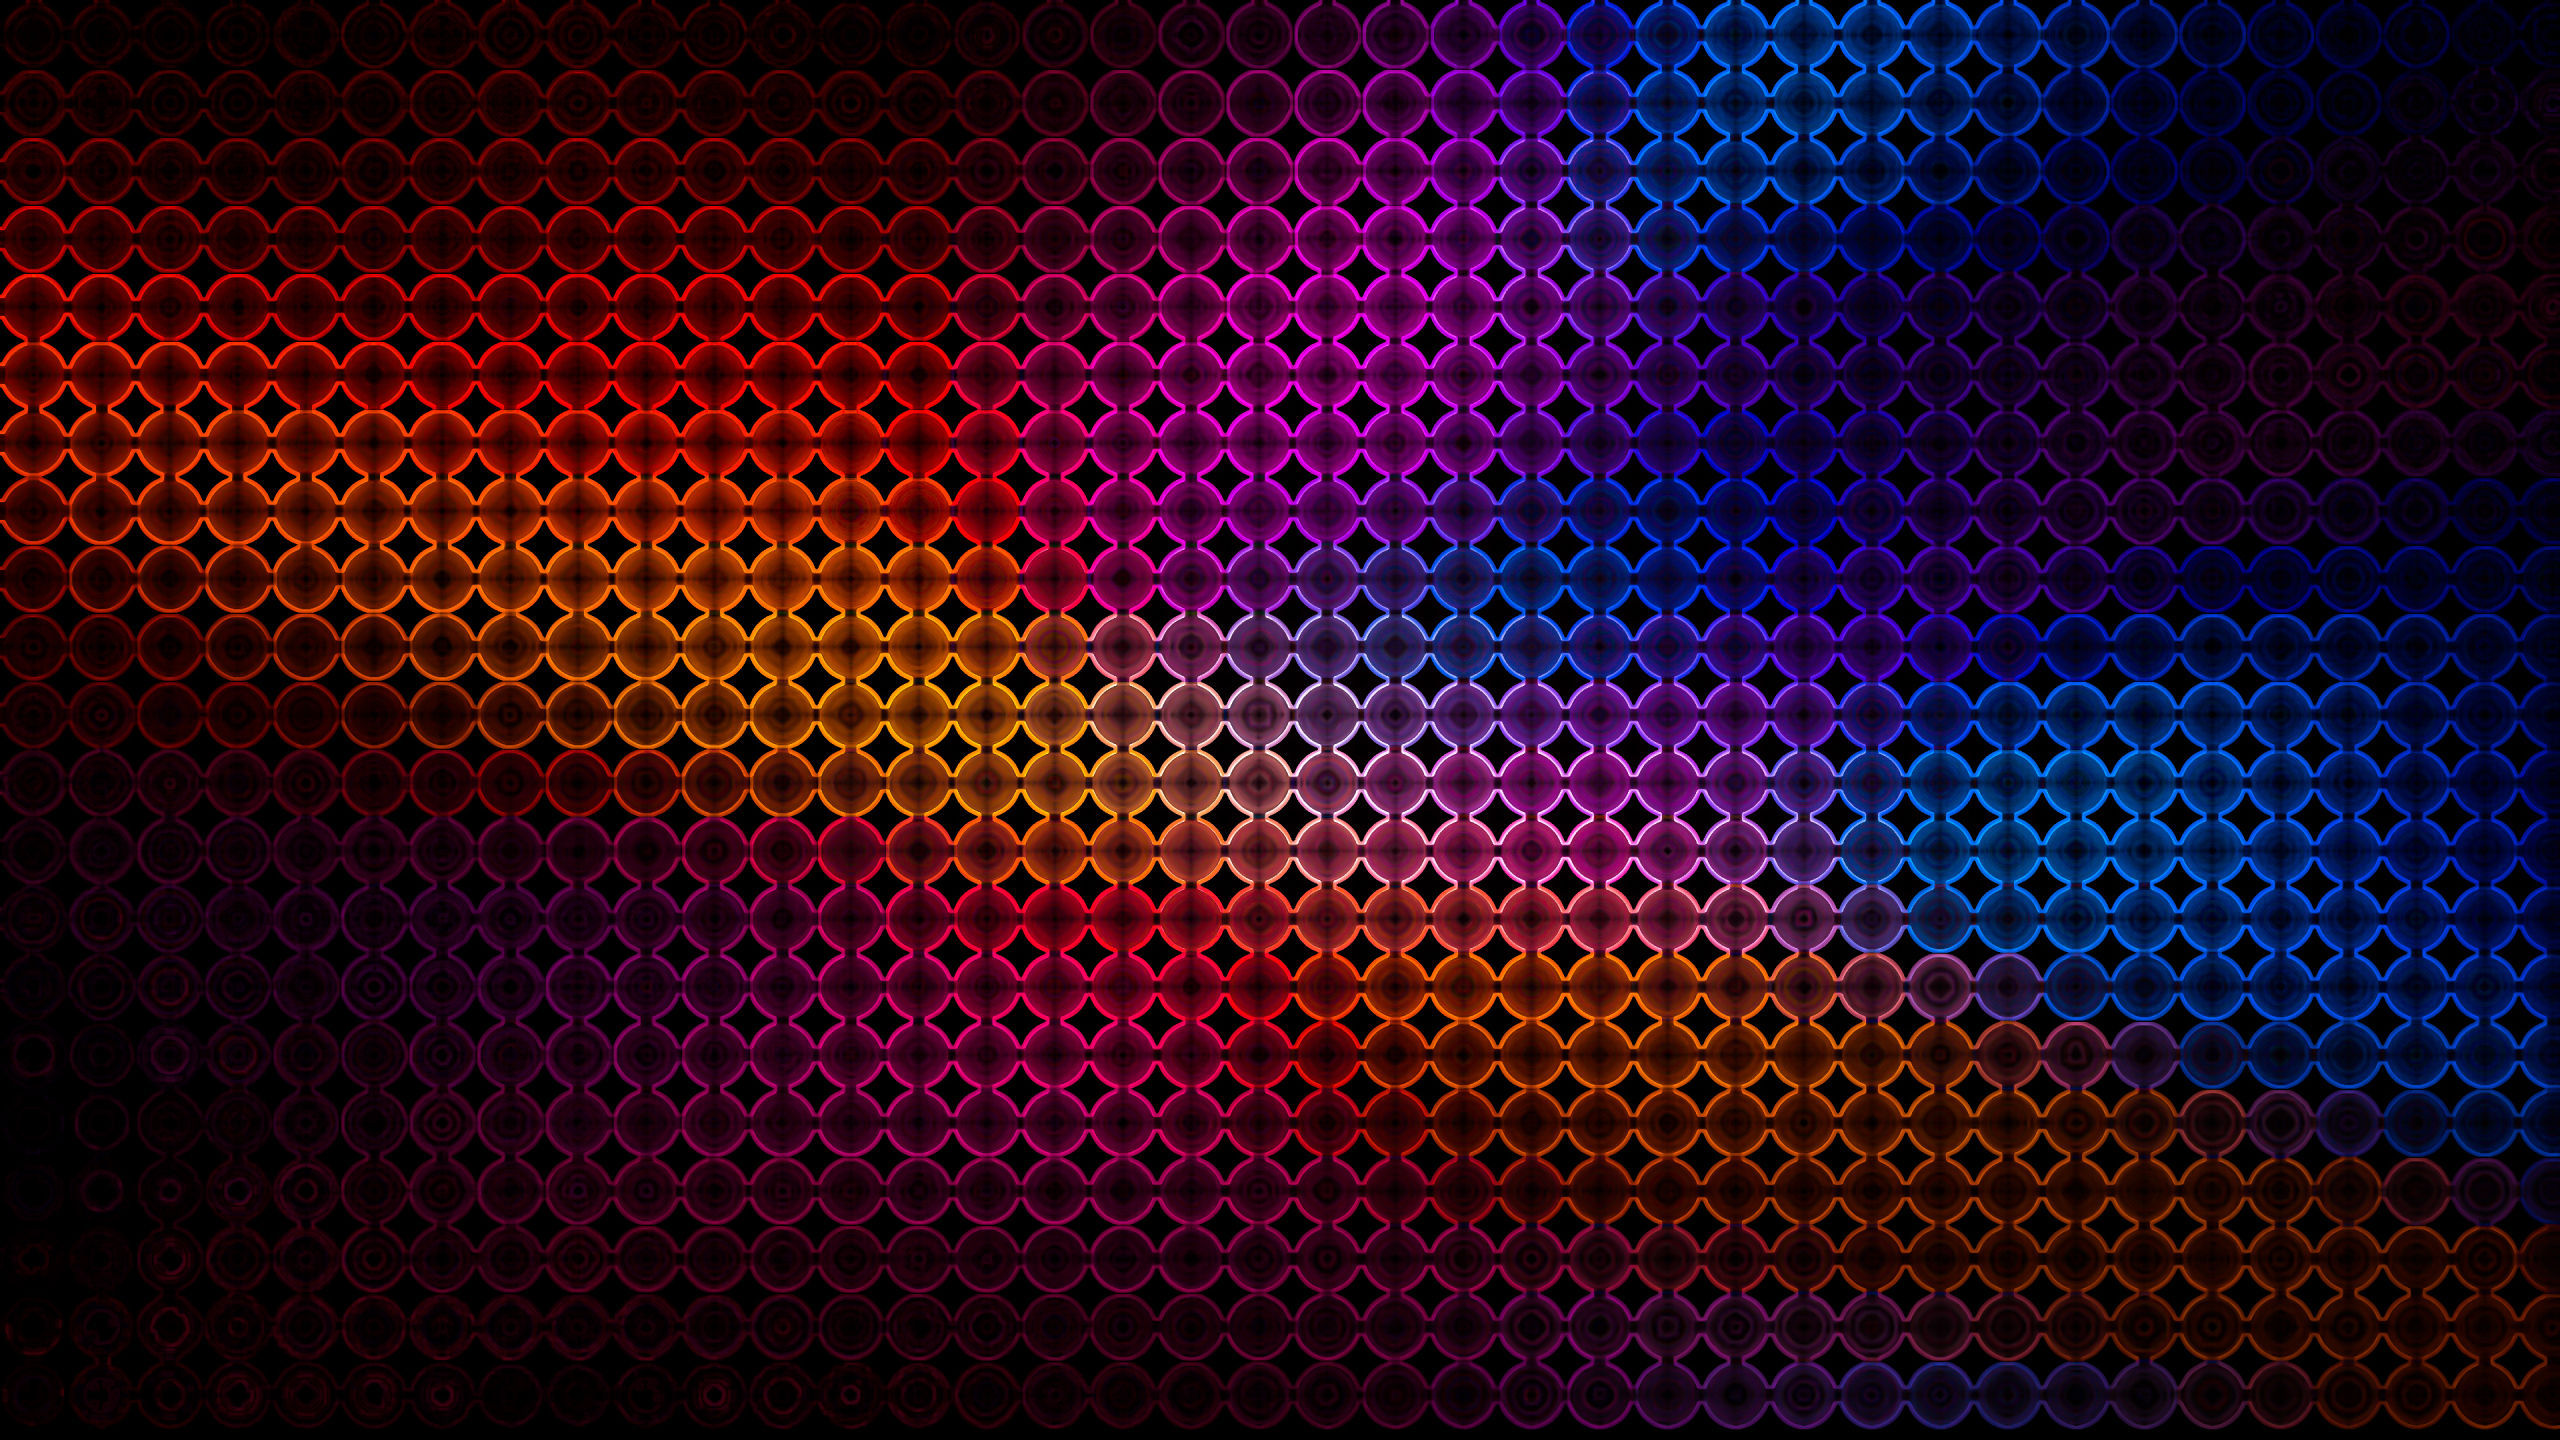 Download 2560x1440 Wallpaper Colorful Black Dots Abstract Dual Wide